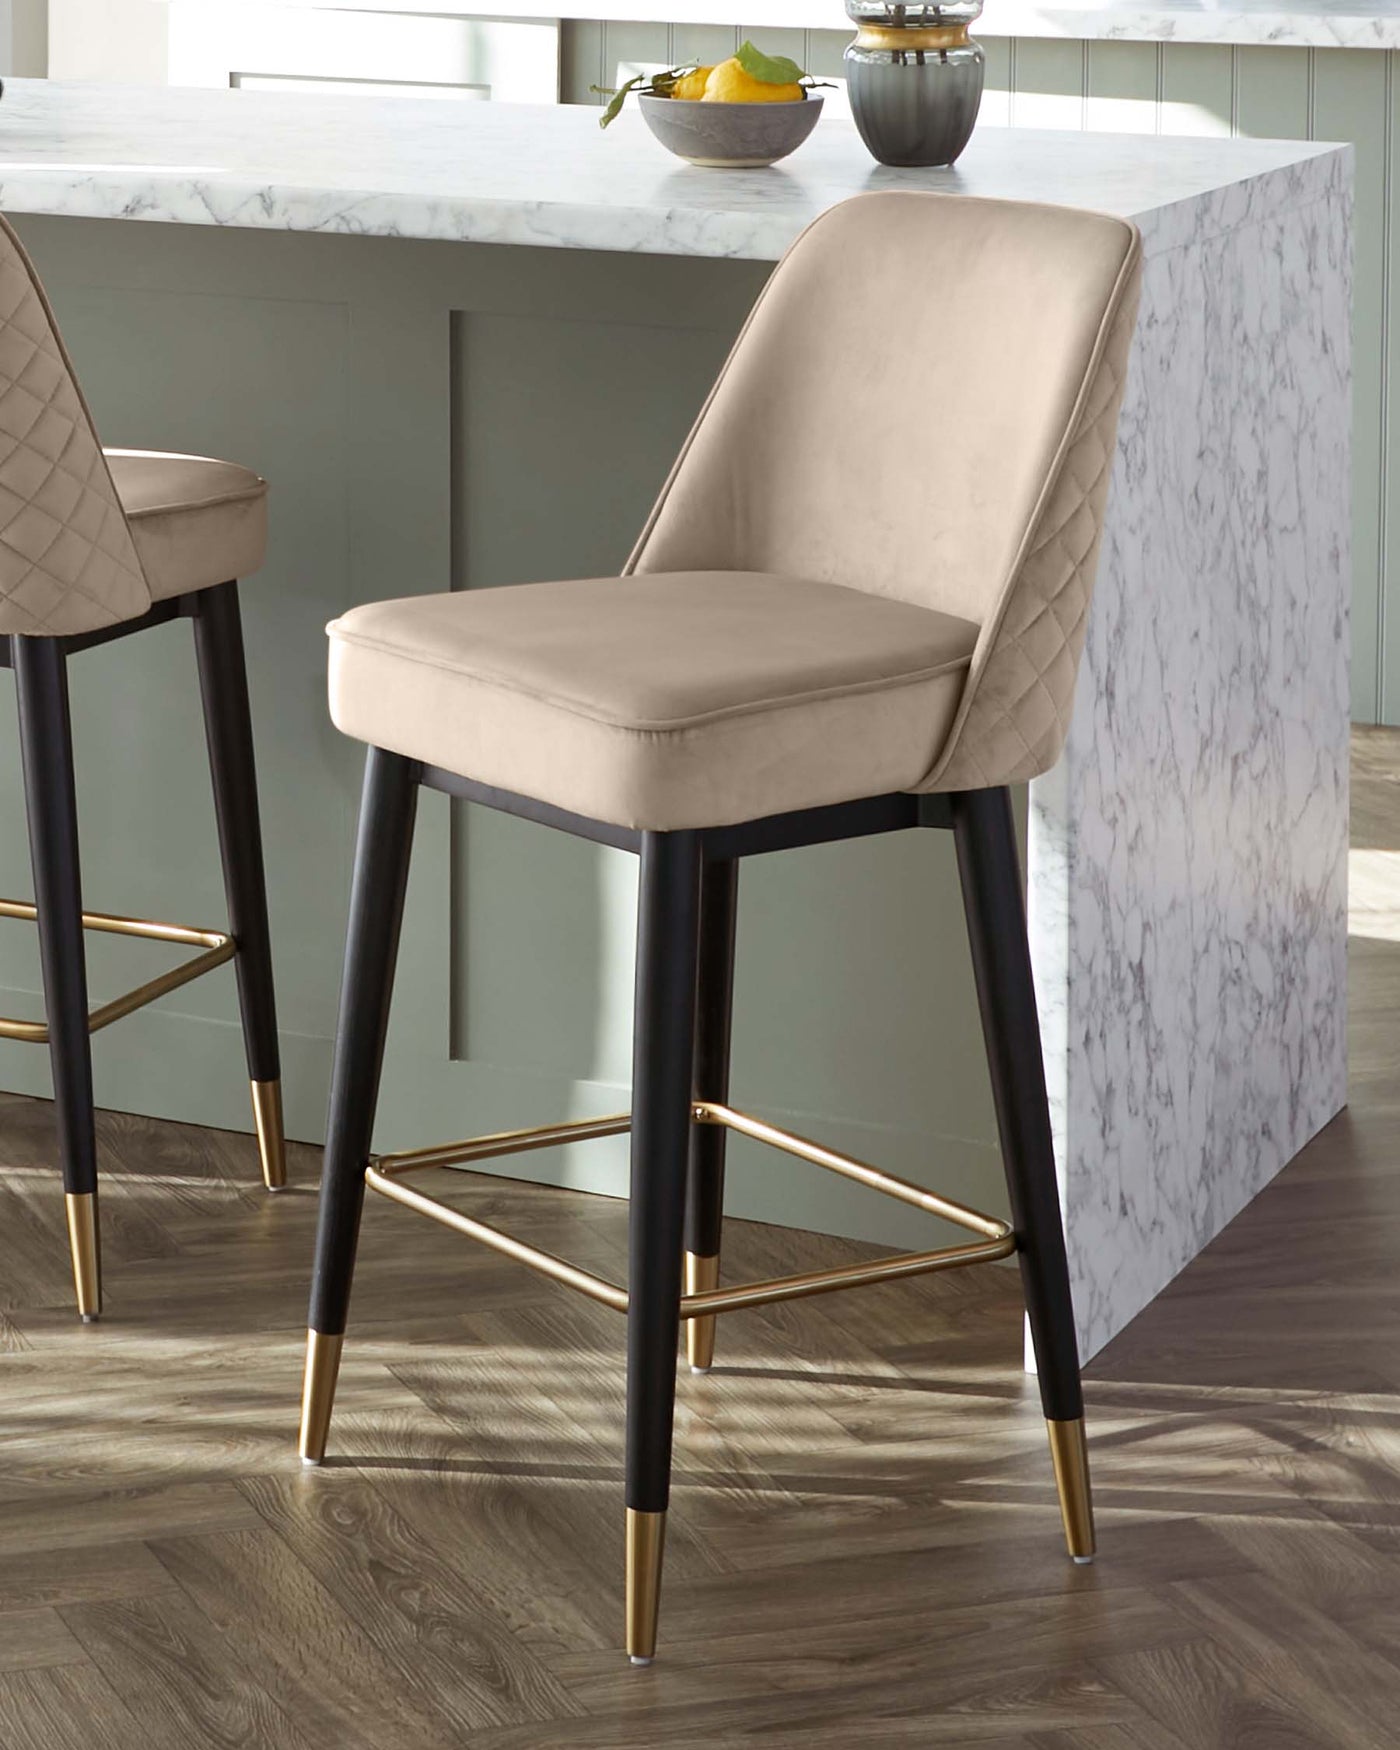 Elegant modern bar stool with a beige upholstered seat and backrest featuring diamond tufting, contrasting with sleek black legs tipped with gold accents. The stool sits beside a marble kitchen island on a wooden floor, suggesting a luxurious and contemporary aesthetic.